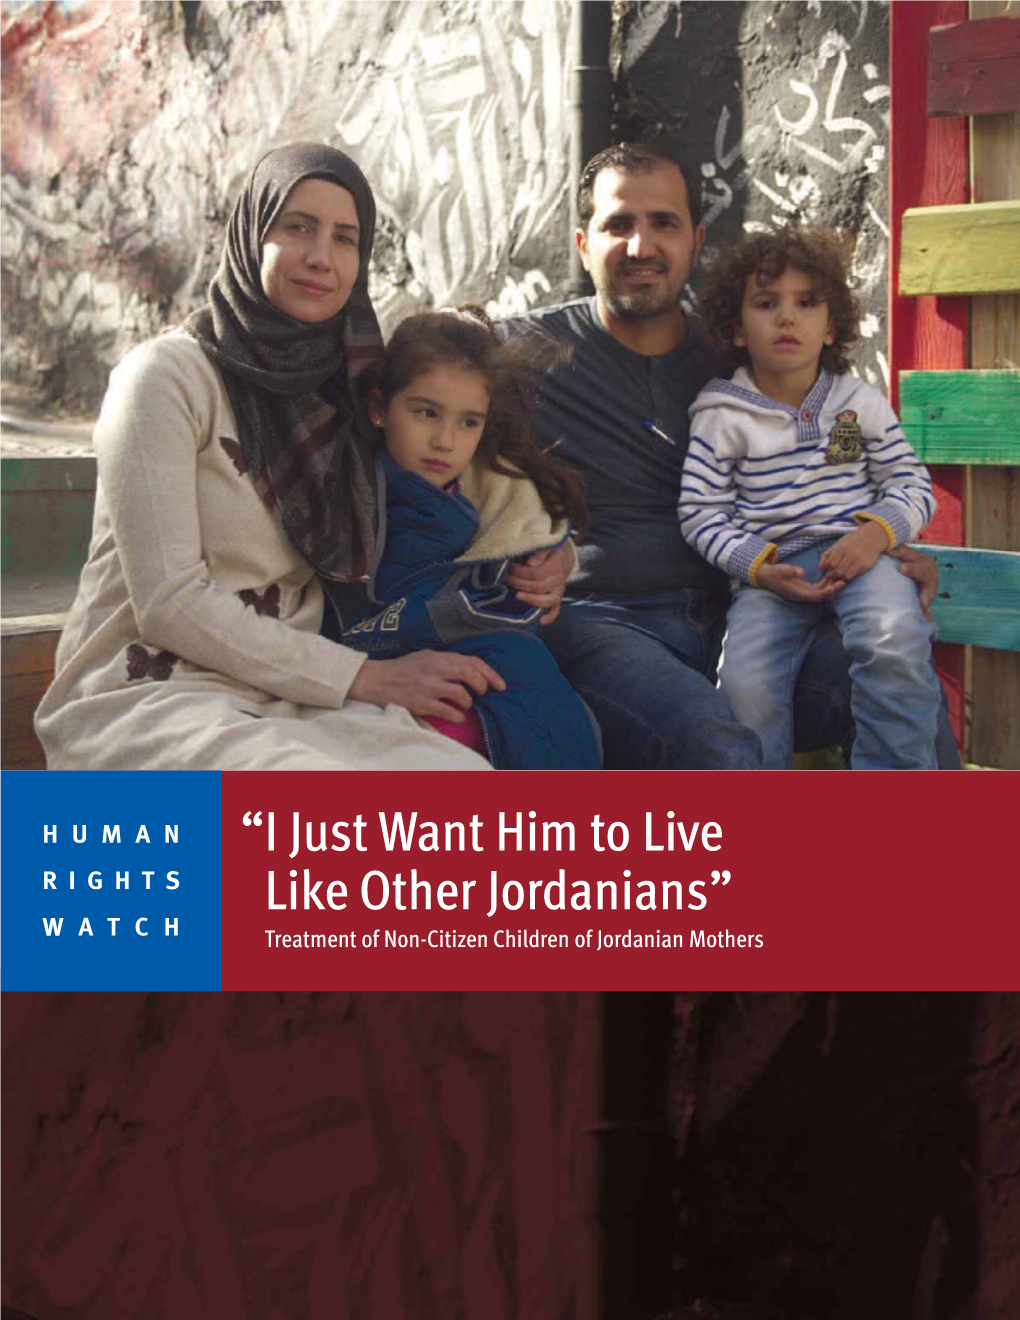 “I Just Want Him to Live Like Other Jordanians” Treatment of Non-Citizen Children of Jordanian Mothers